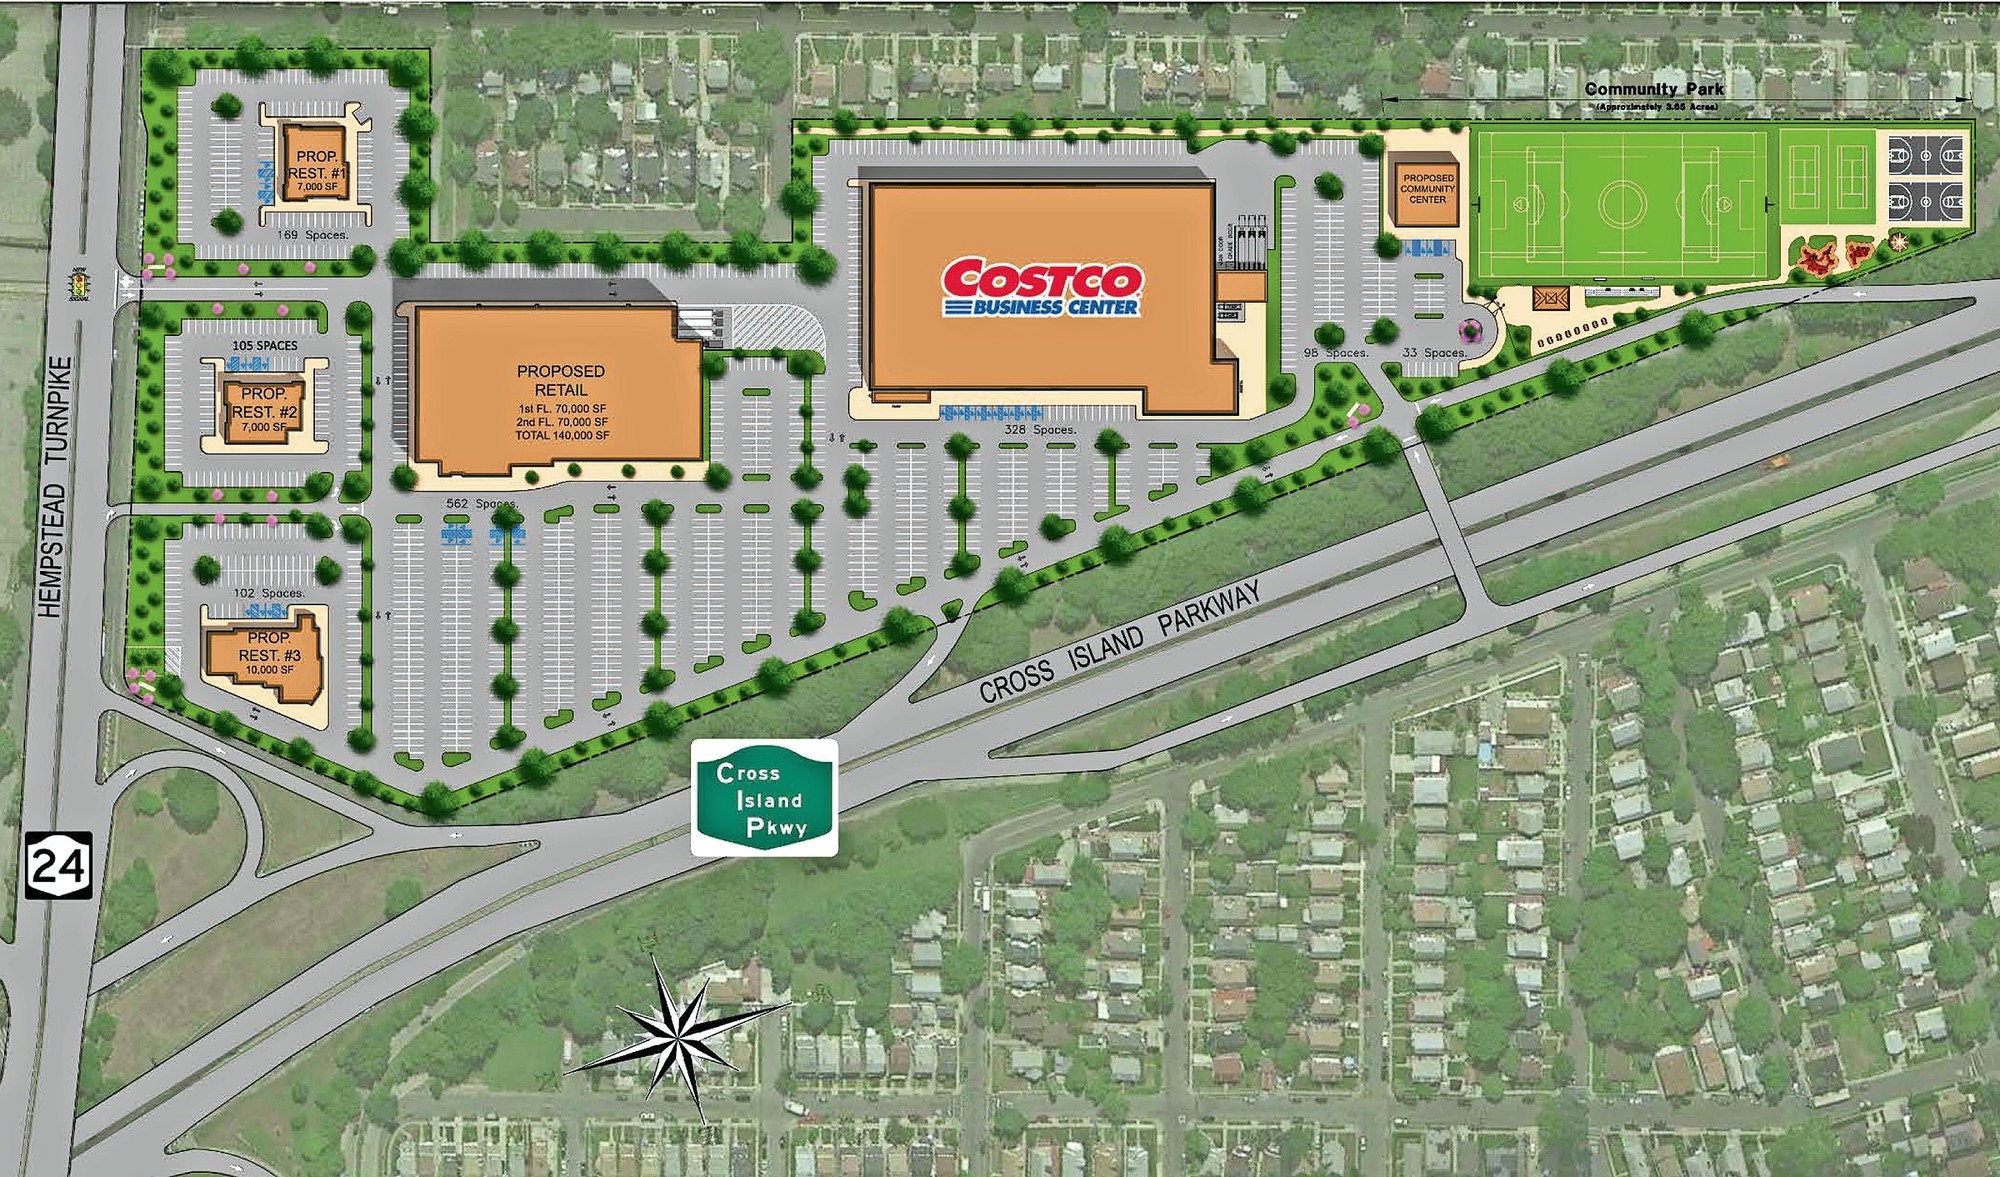 the Blumenfeld Development Group’s plan for Belmont Park consists of a smaller Costco along with restaurants, retail space and a recreation center.